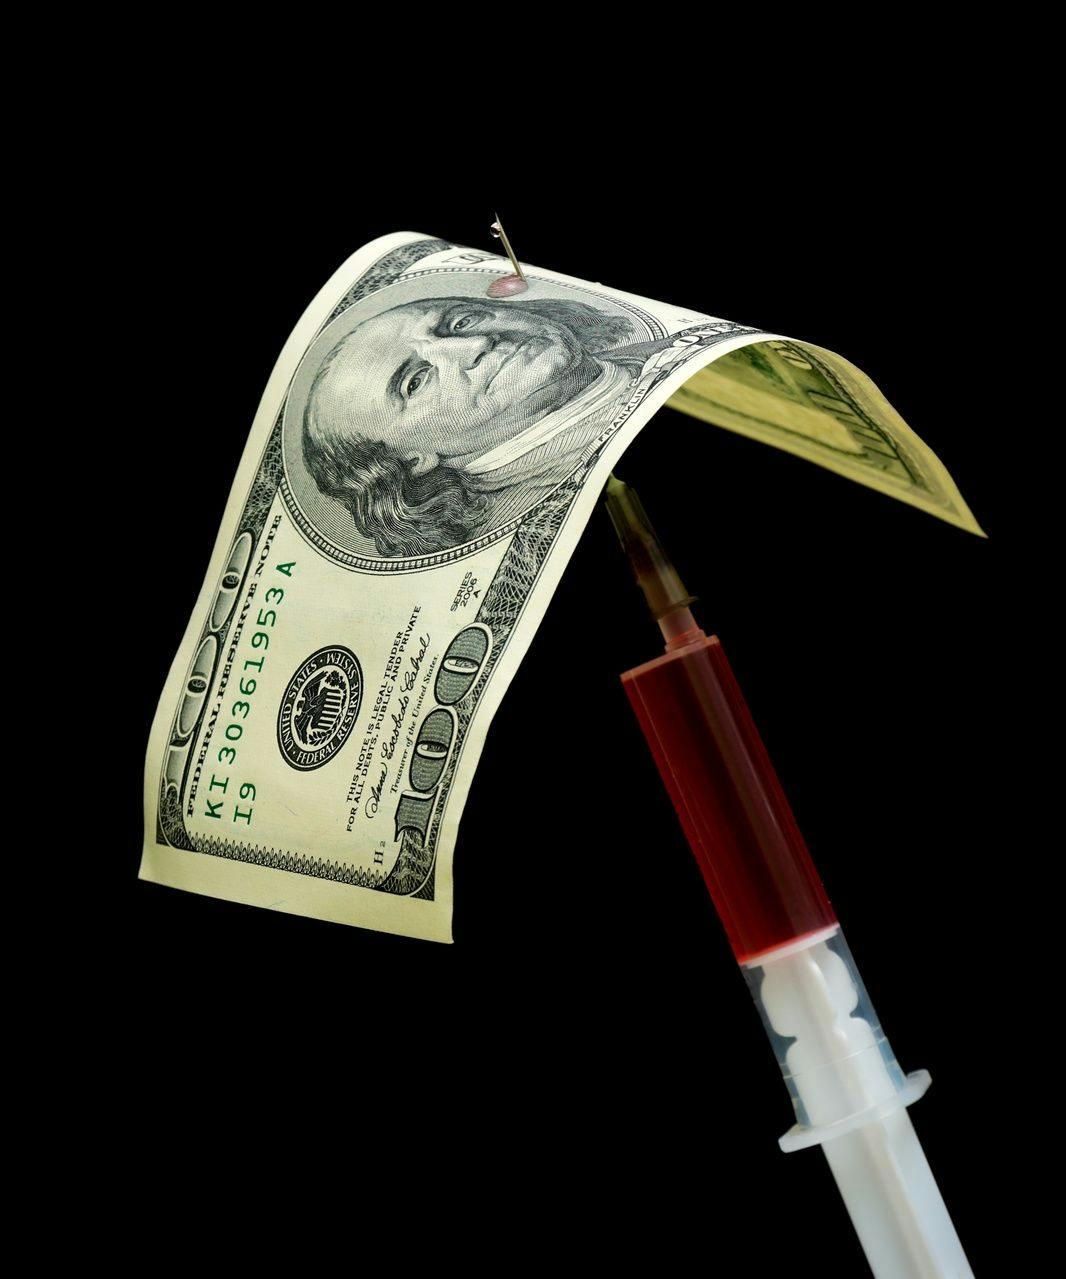 Change Dosing Regimens To Lower Drug Costs? It's Possible, Researchers Say